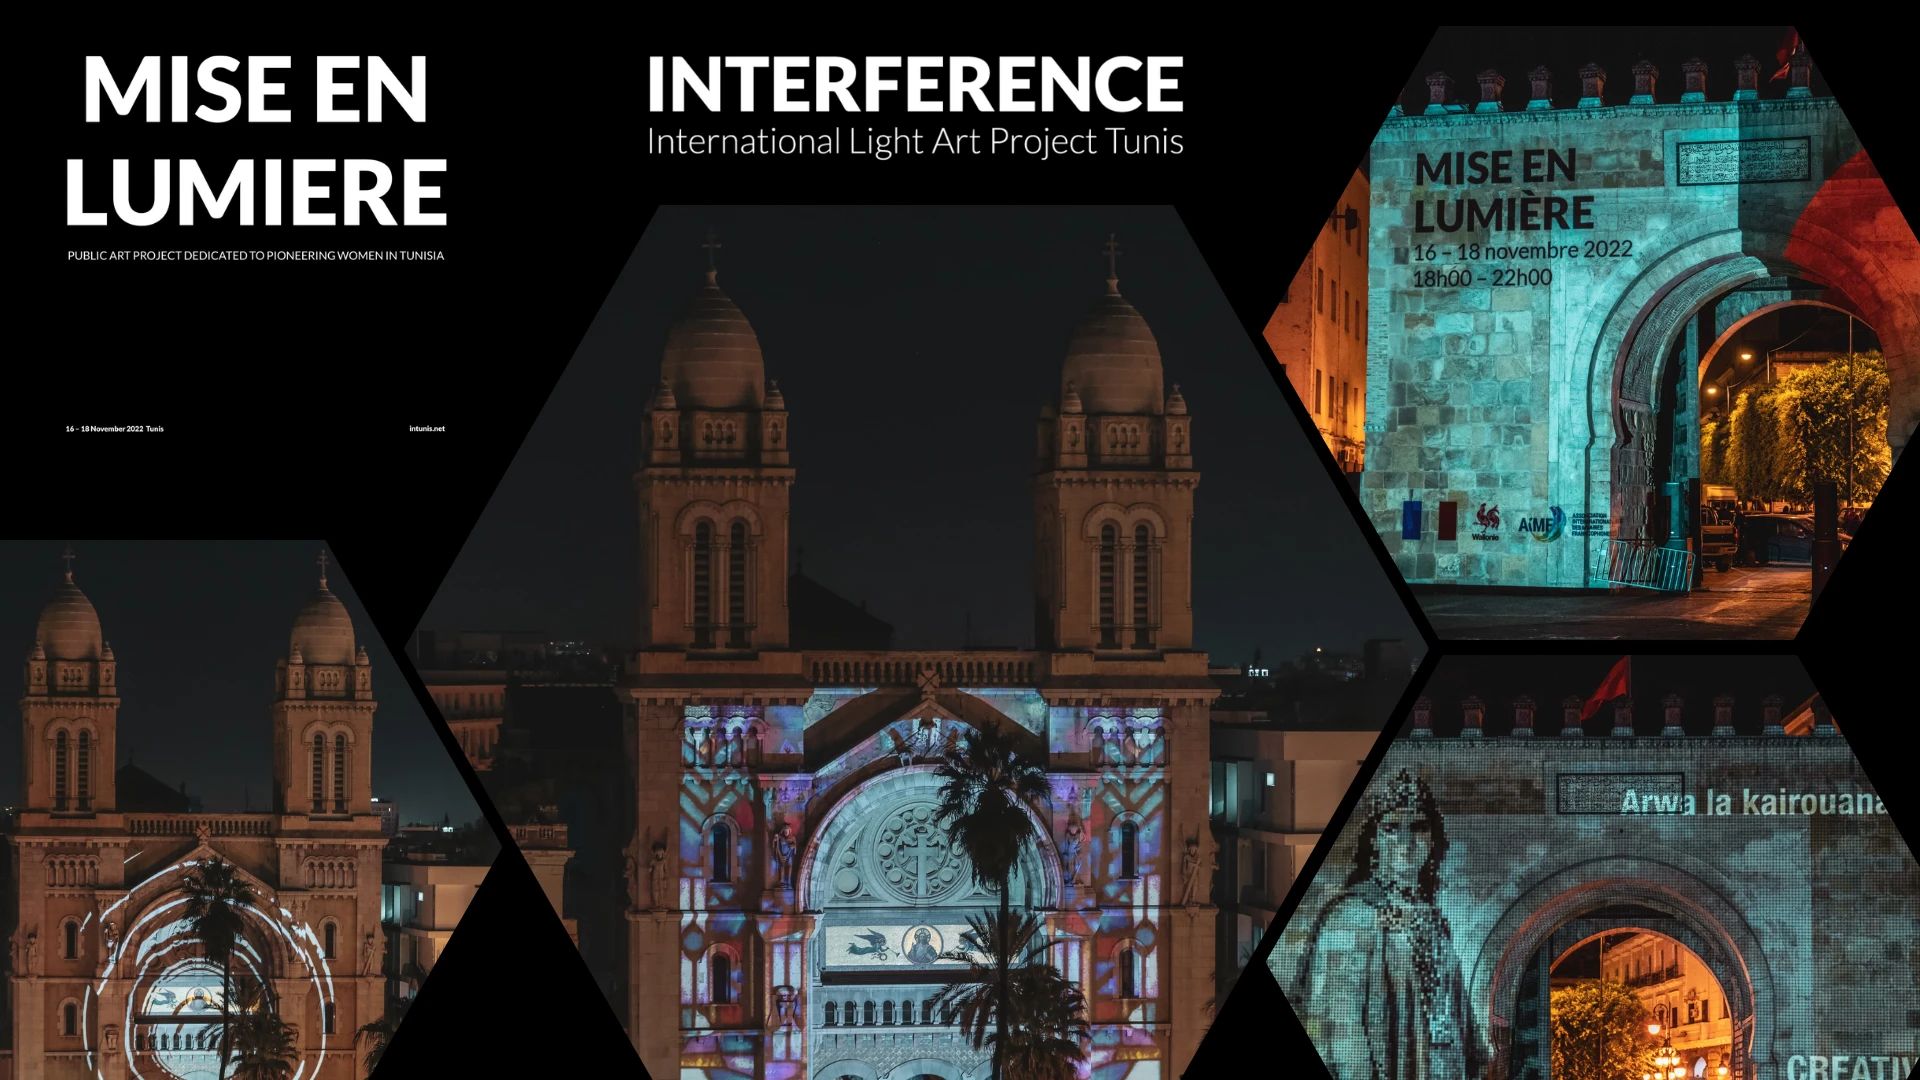 Mise_en_lumiere_interference